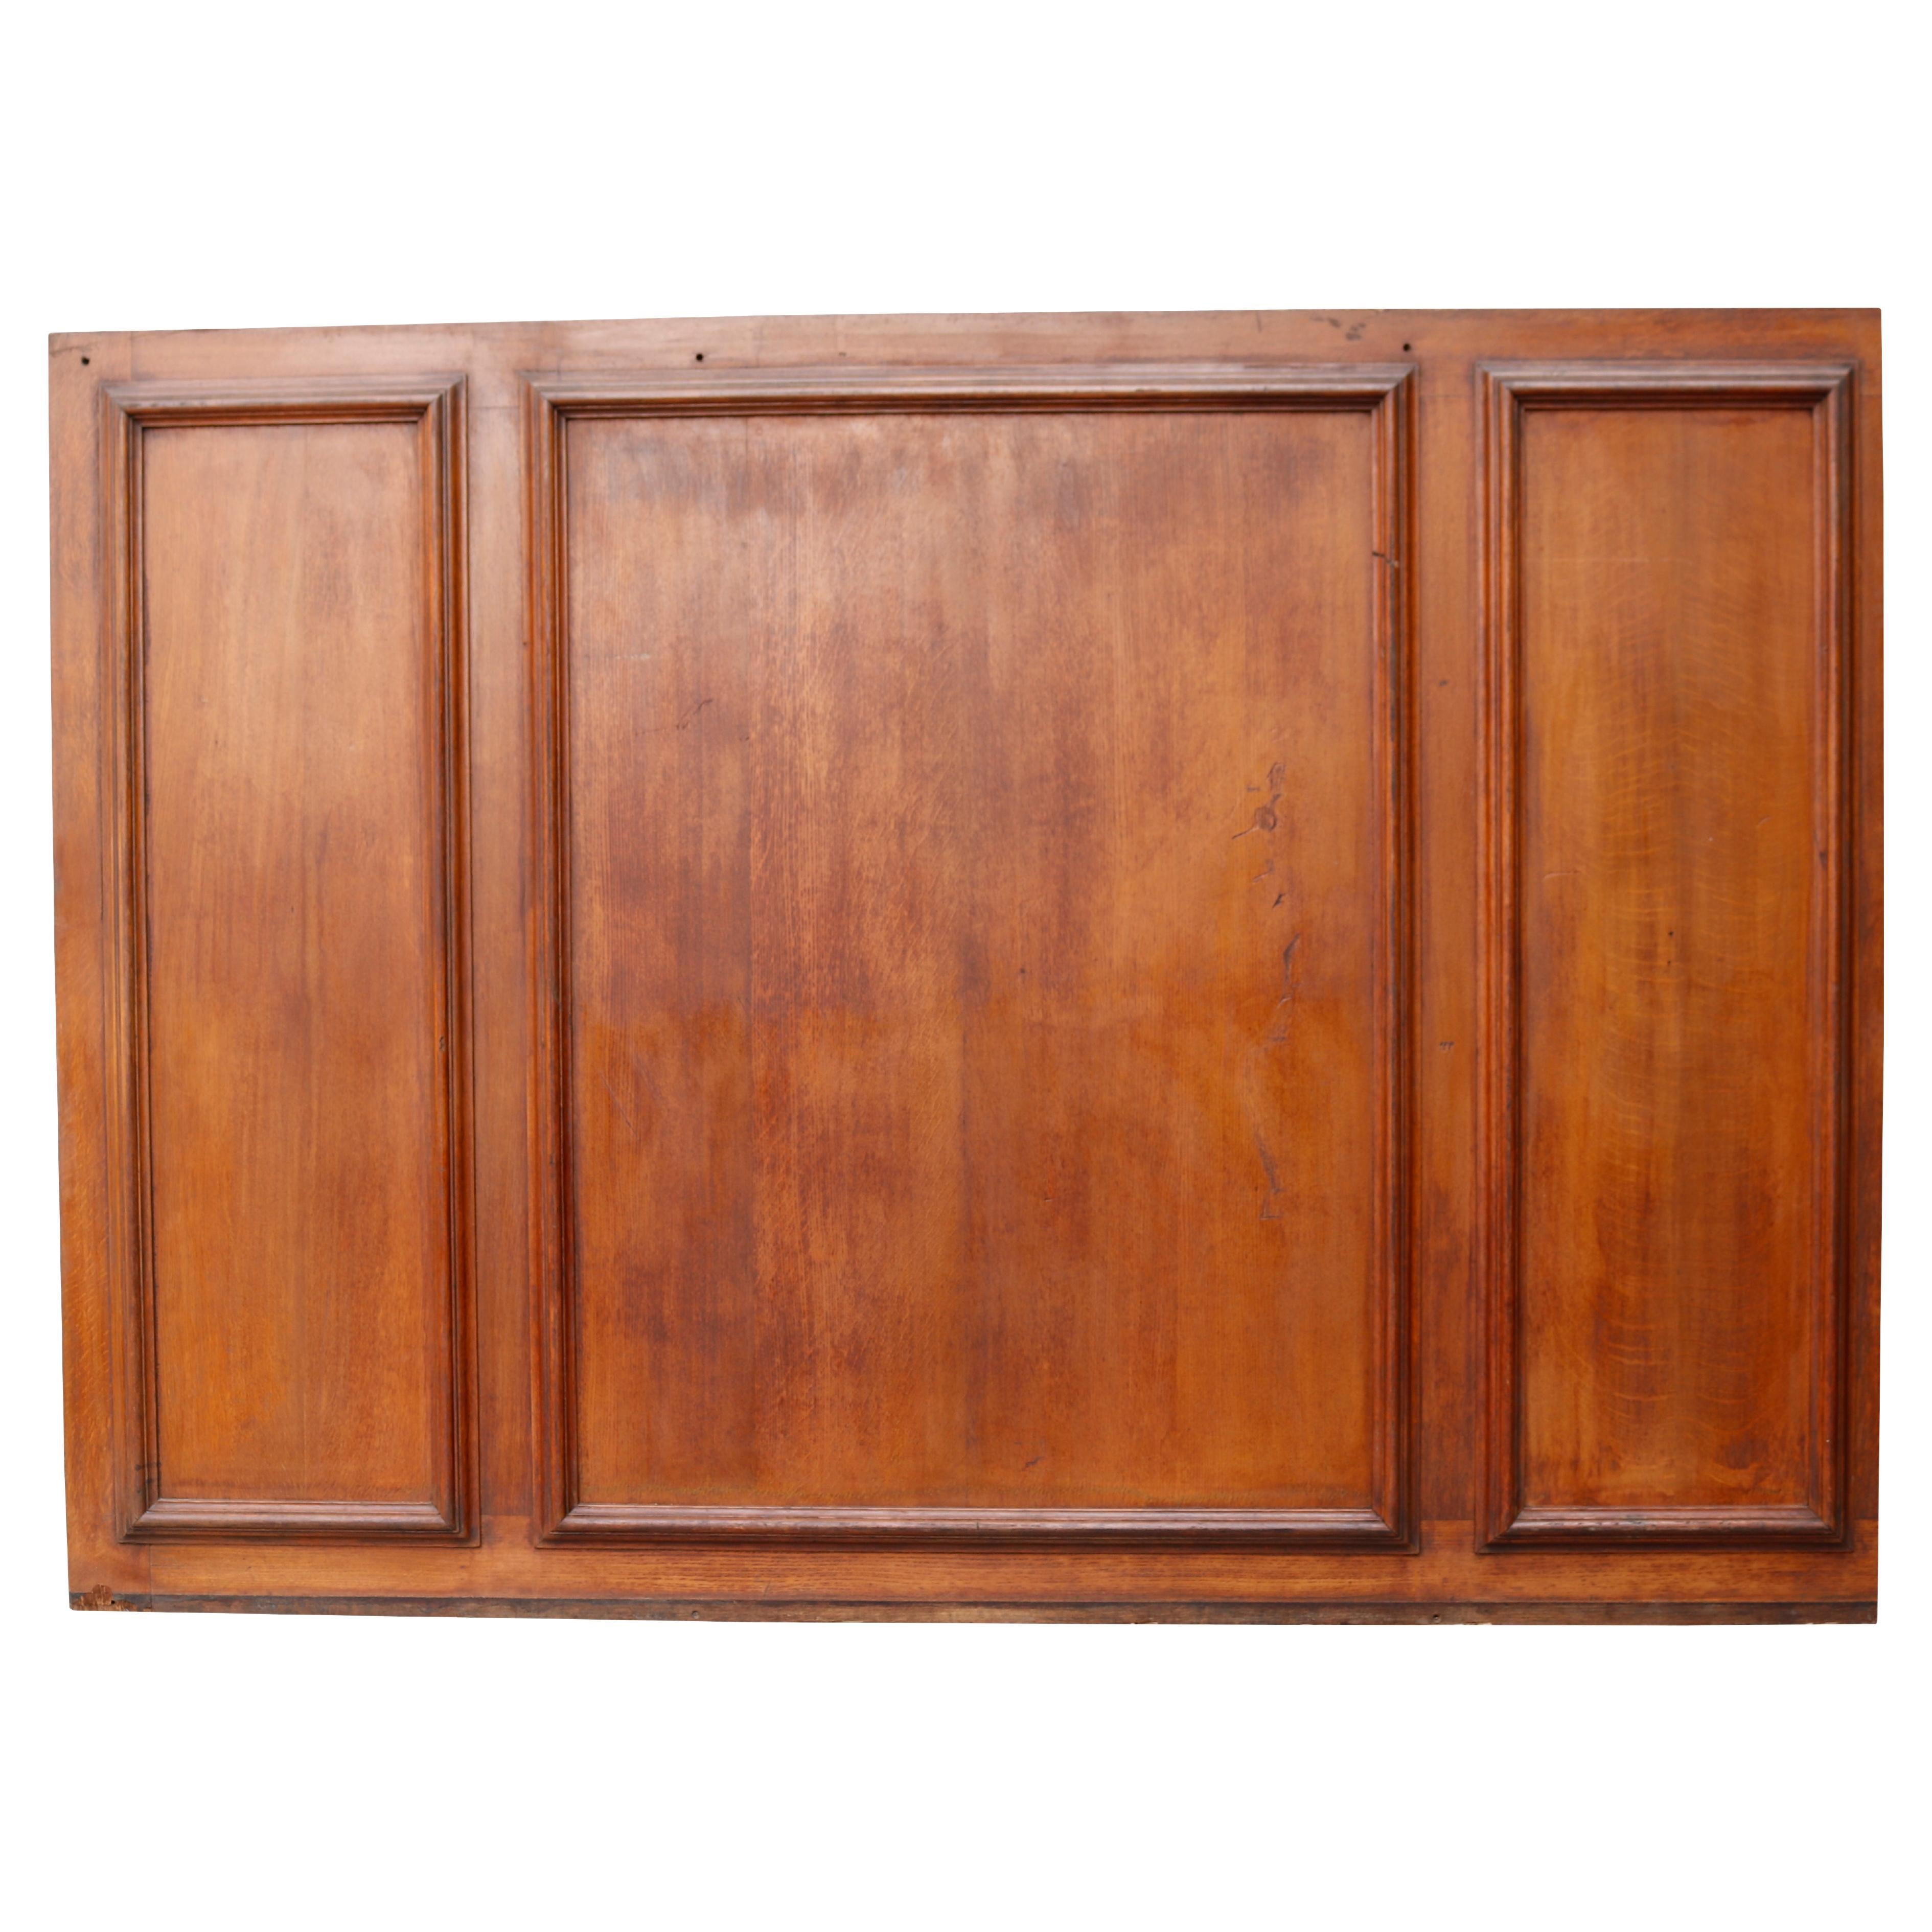 Antique Oak Wall Panelling For Sale